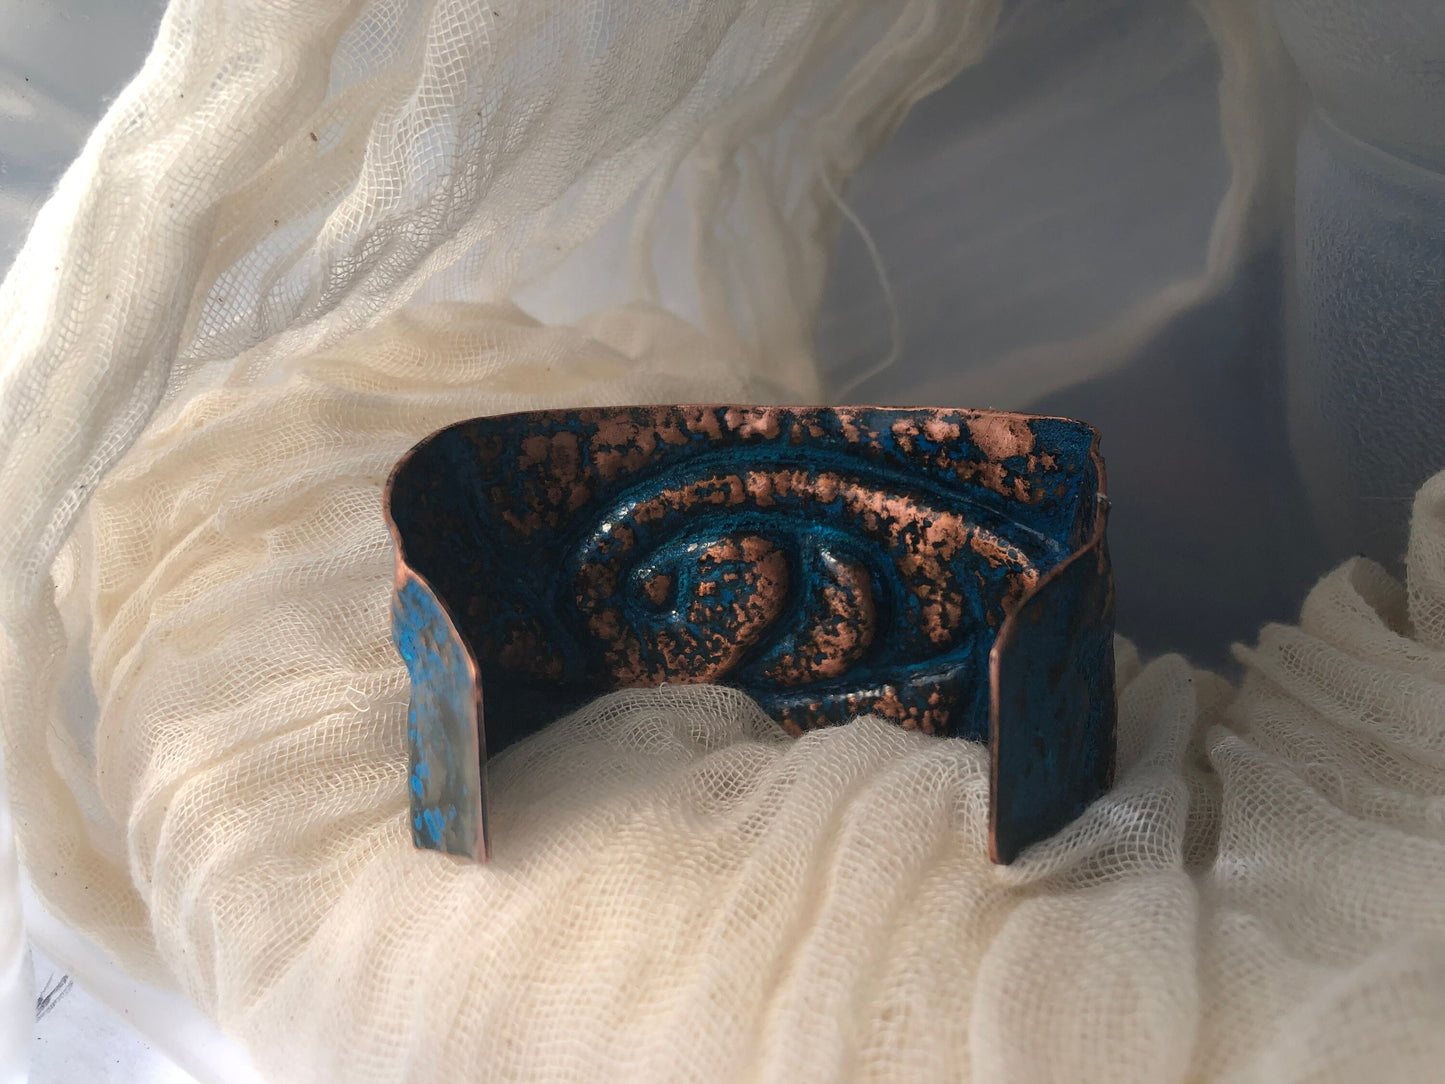 Wave cuff in repoussé and chased copper with blue patina